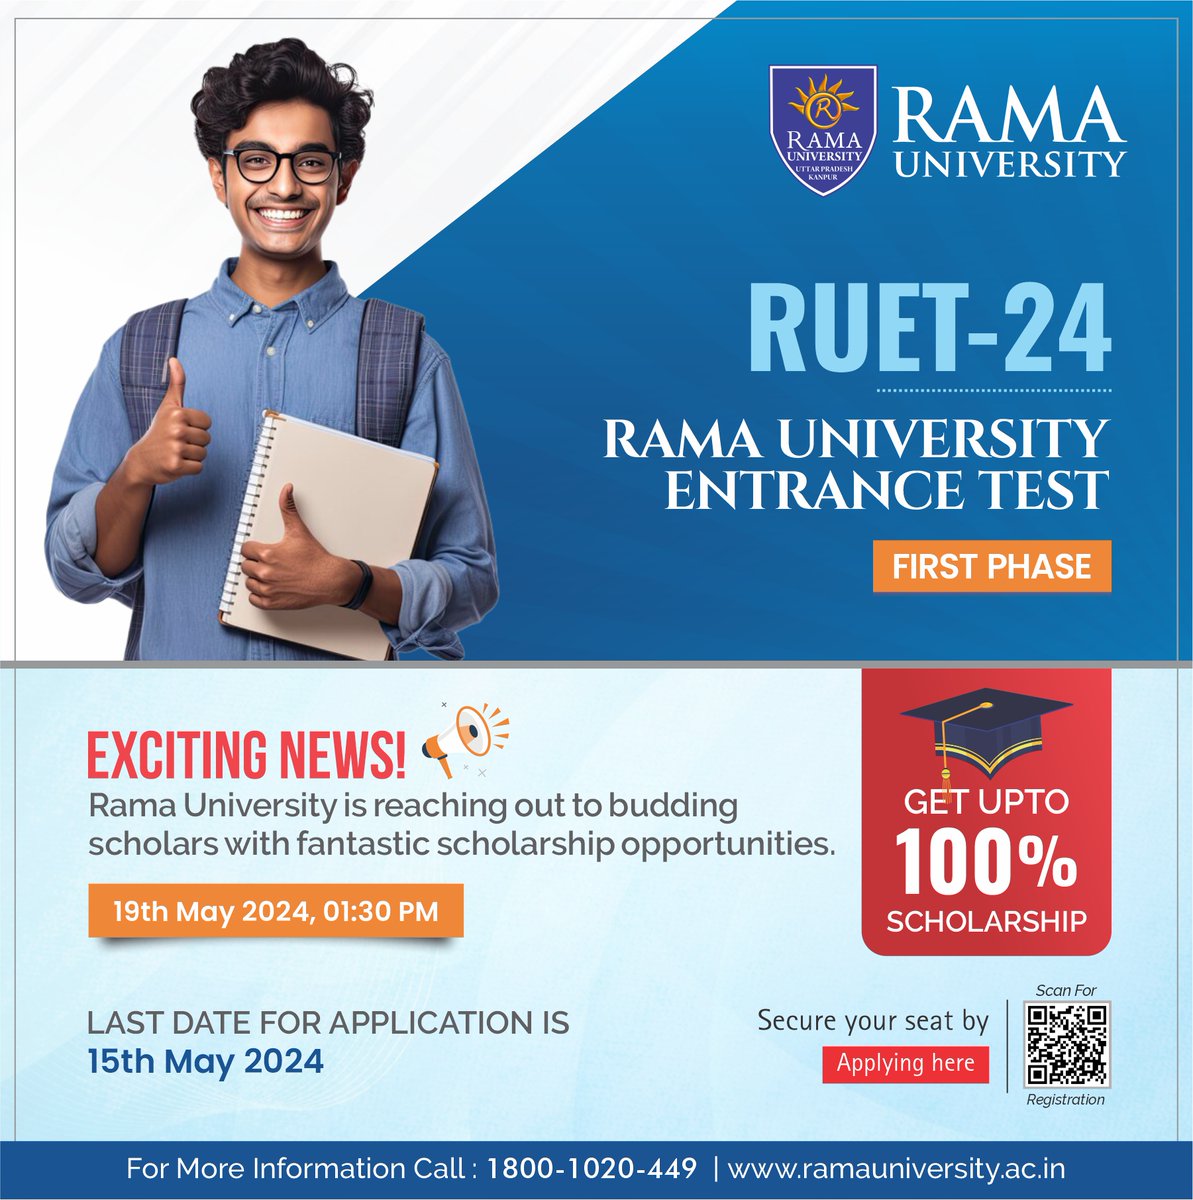 From Engineering to Law, Medicine to Management, Mass Communication to Agriculture, we're offering scholarships spanning from 10% to a whopping 100%

Hurry Up, Last date to apply is May 15th

#RUETExam2024 #Engineering #RamaUniversity #ApplyNow #AdmissionOpen #scholarships